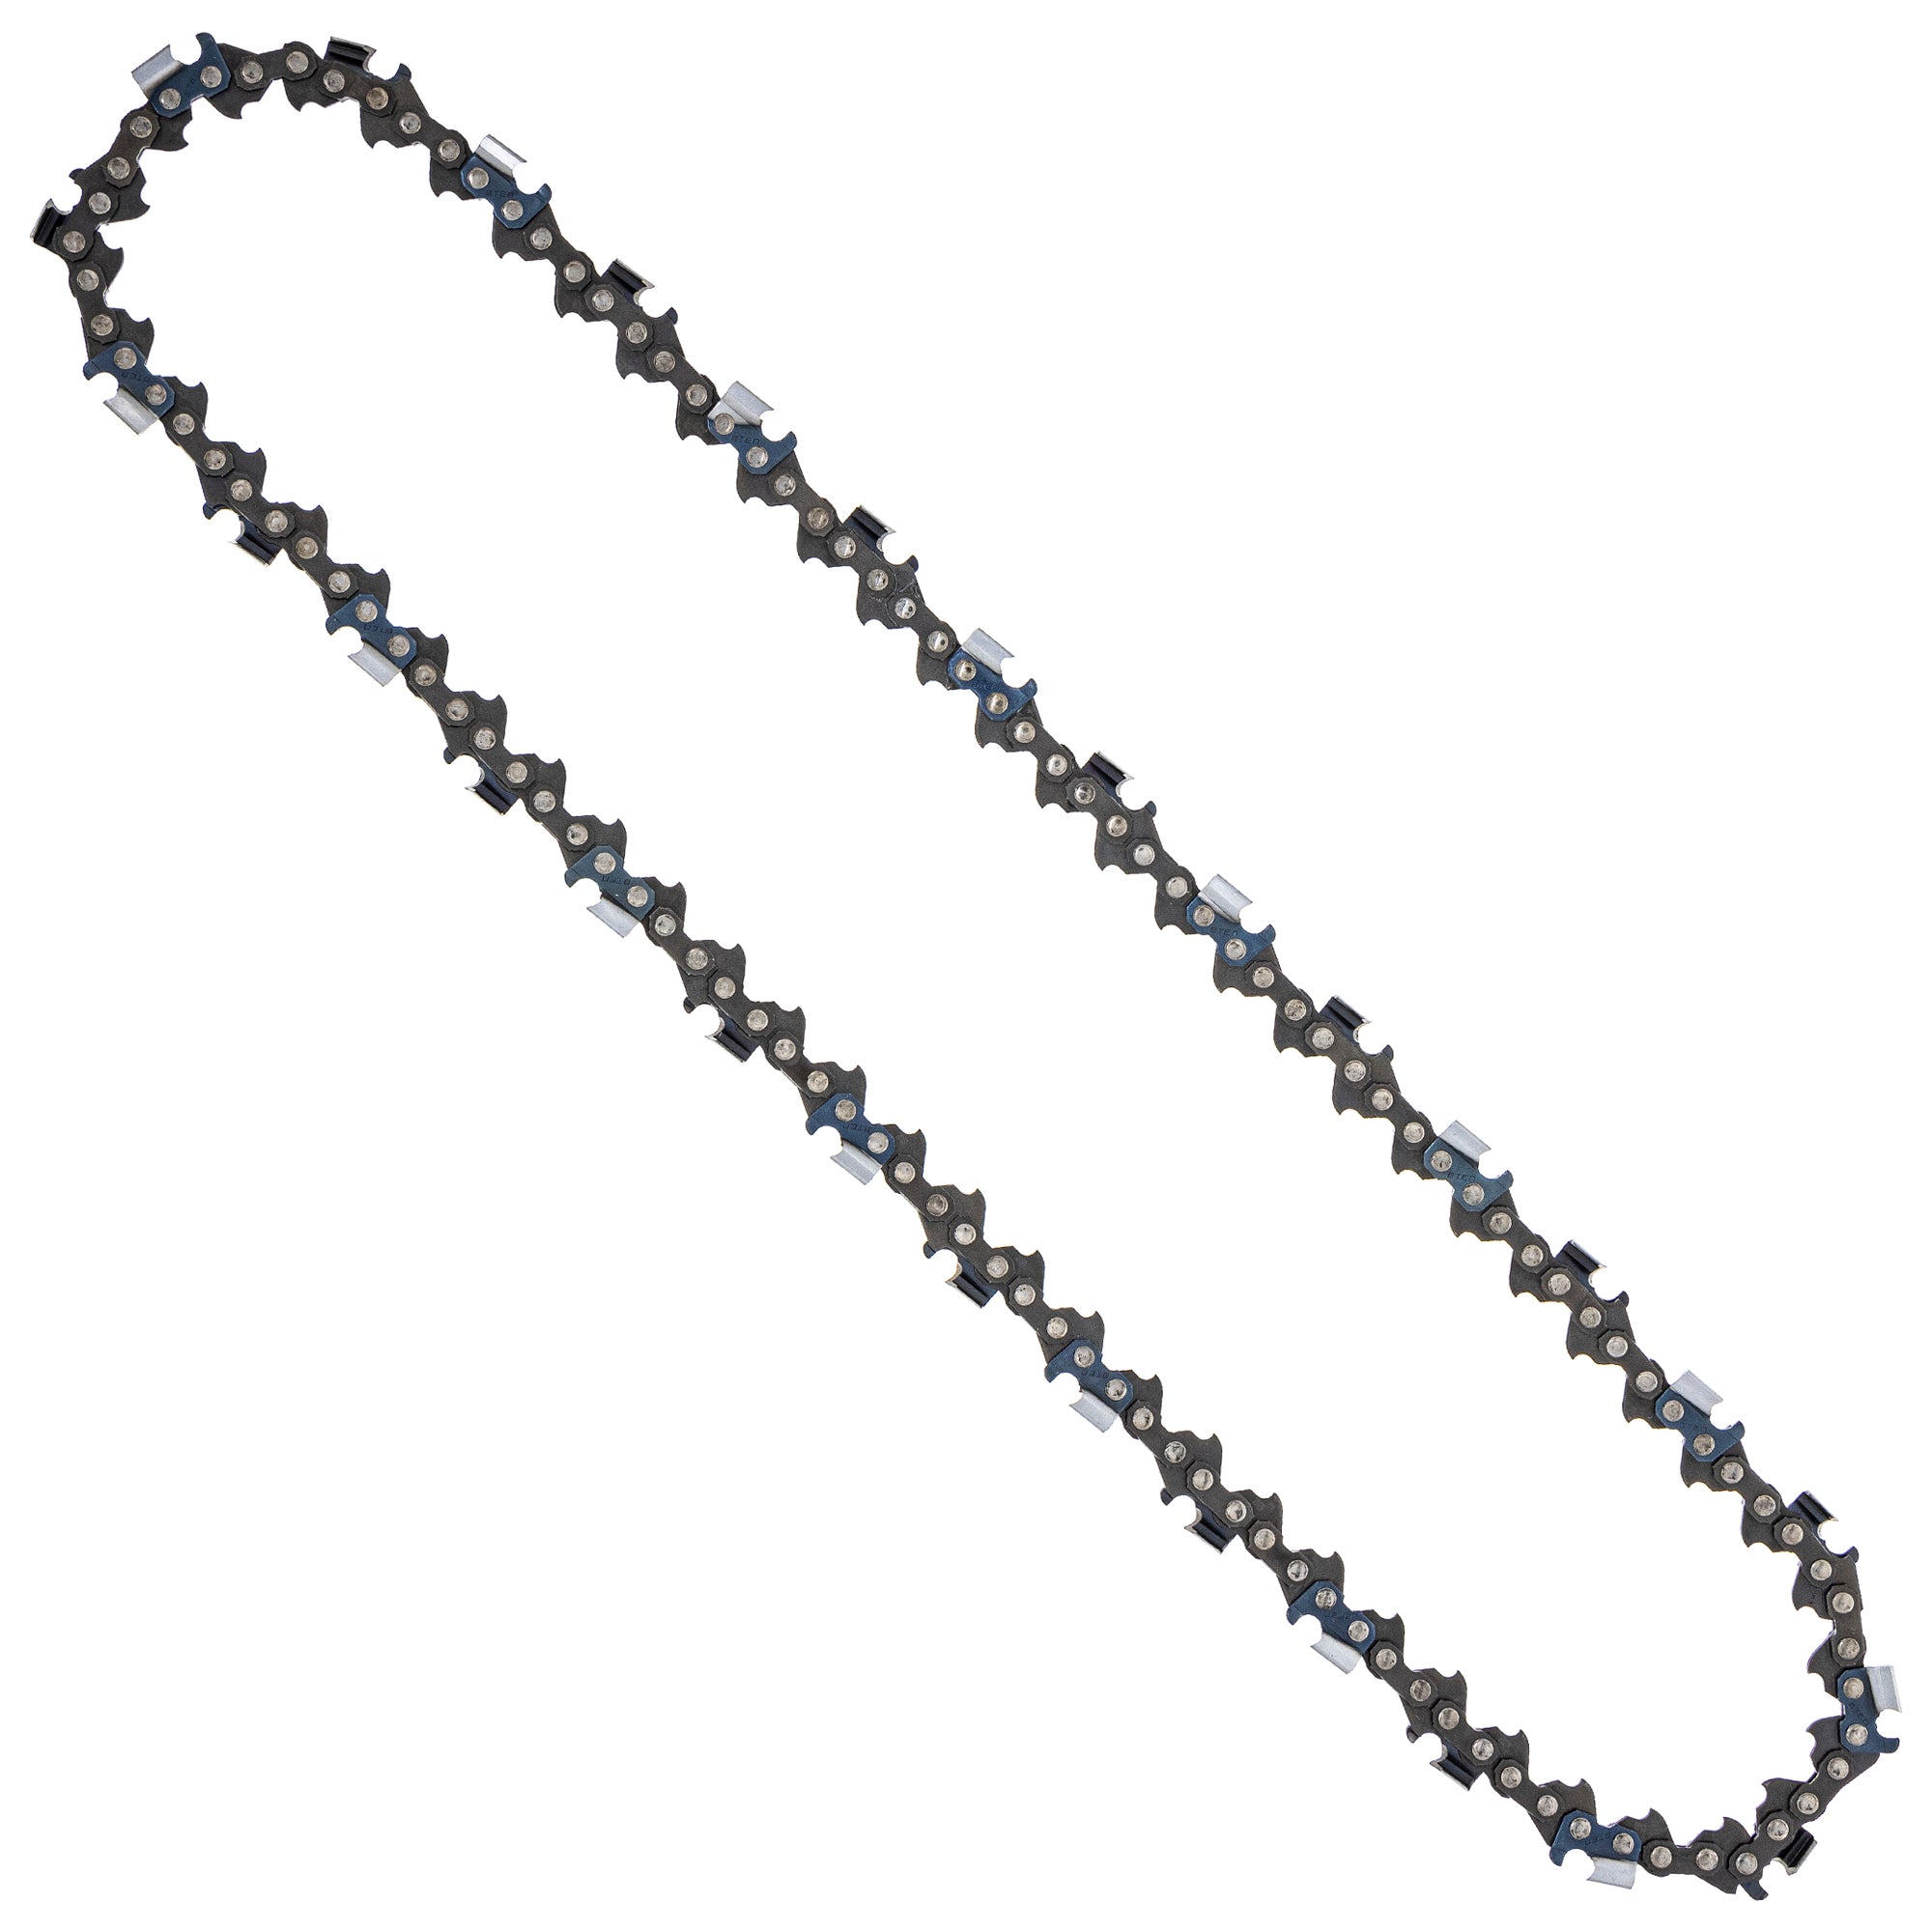 8TEN 810-CCC2316H Chain 2-Pack for zOTHER Oregon Husqvarna Poulan